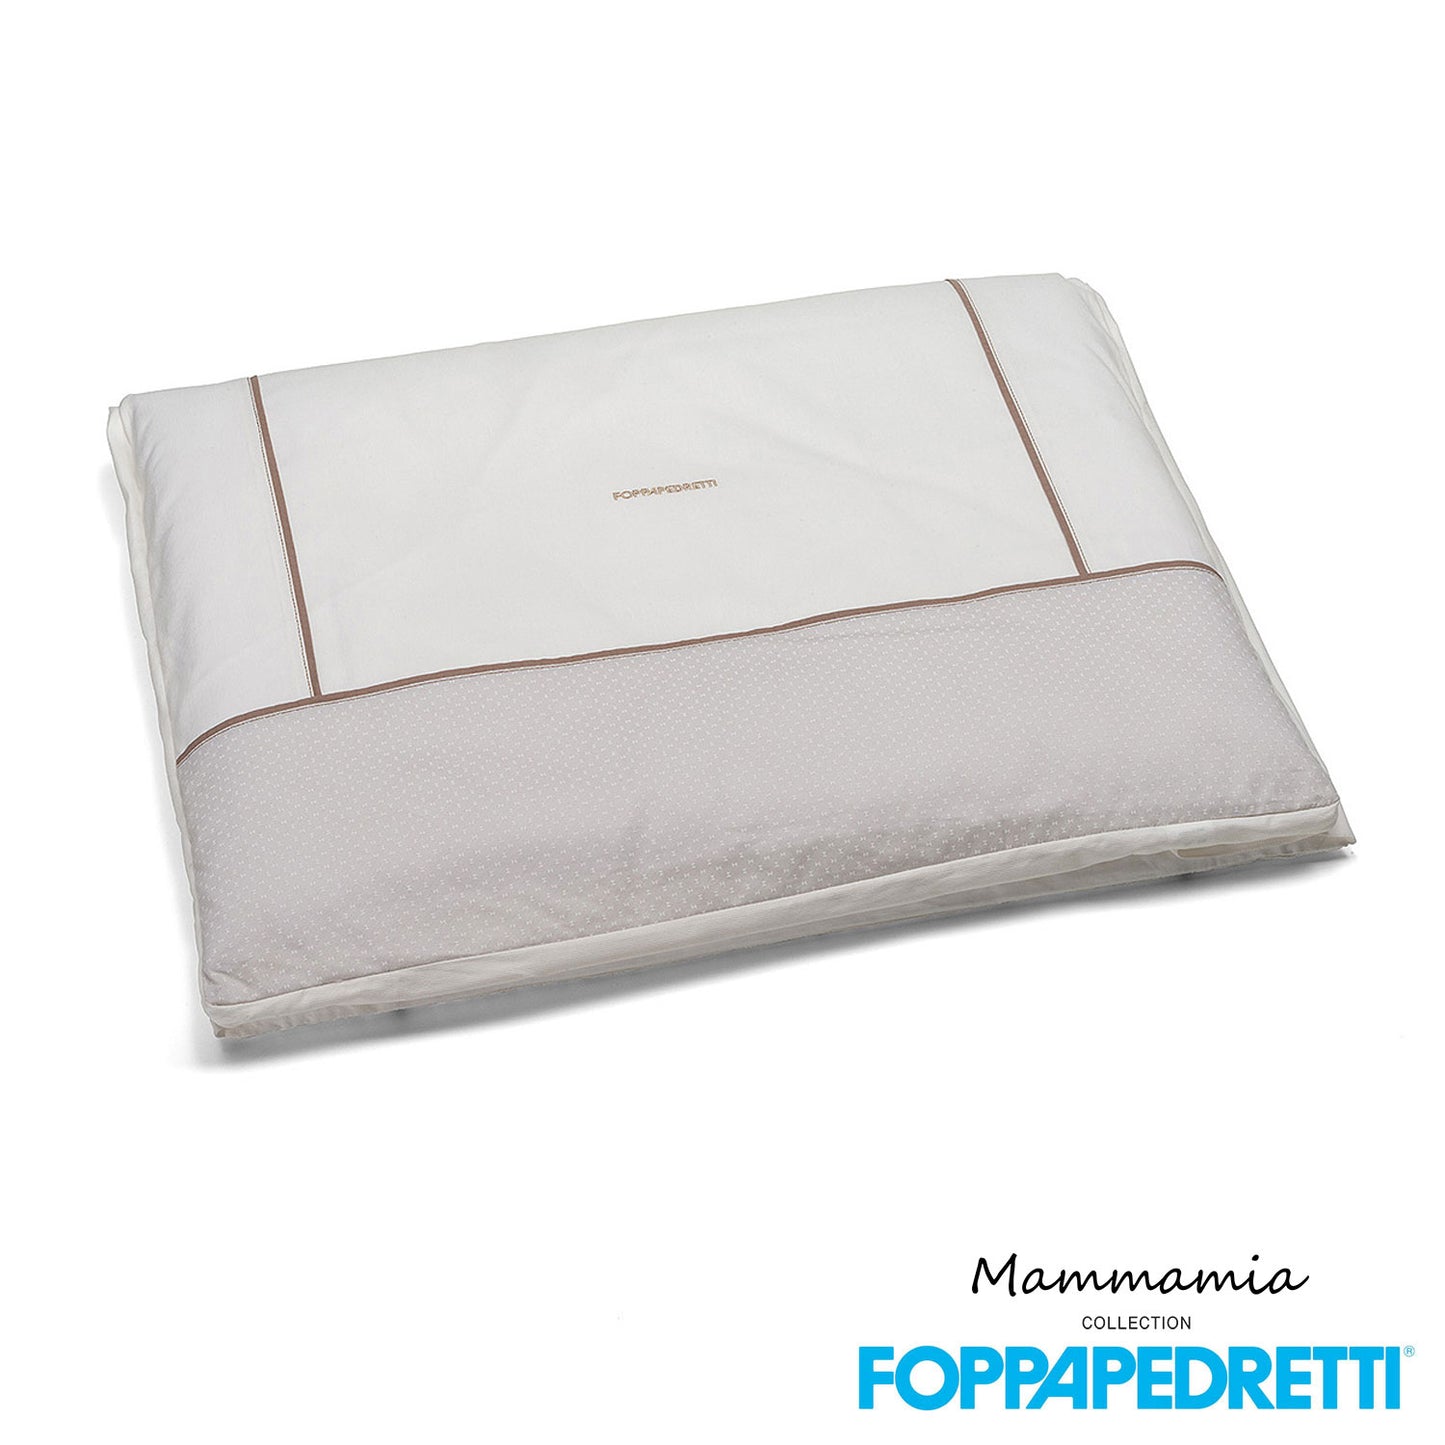 Foppapedretti - Duvet Complete Duvet with Removable Cover for Cot